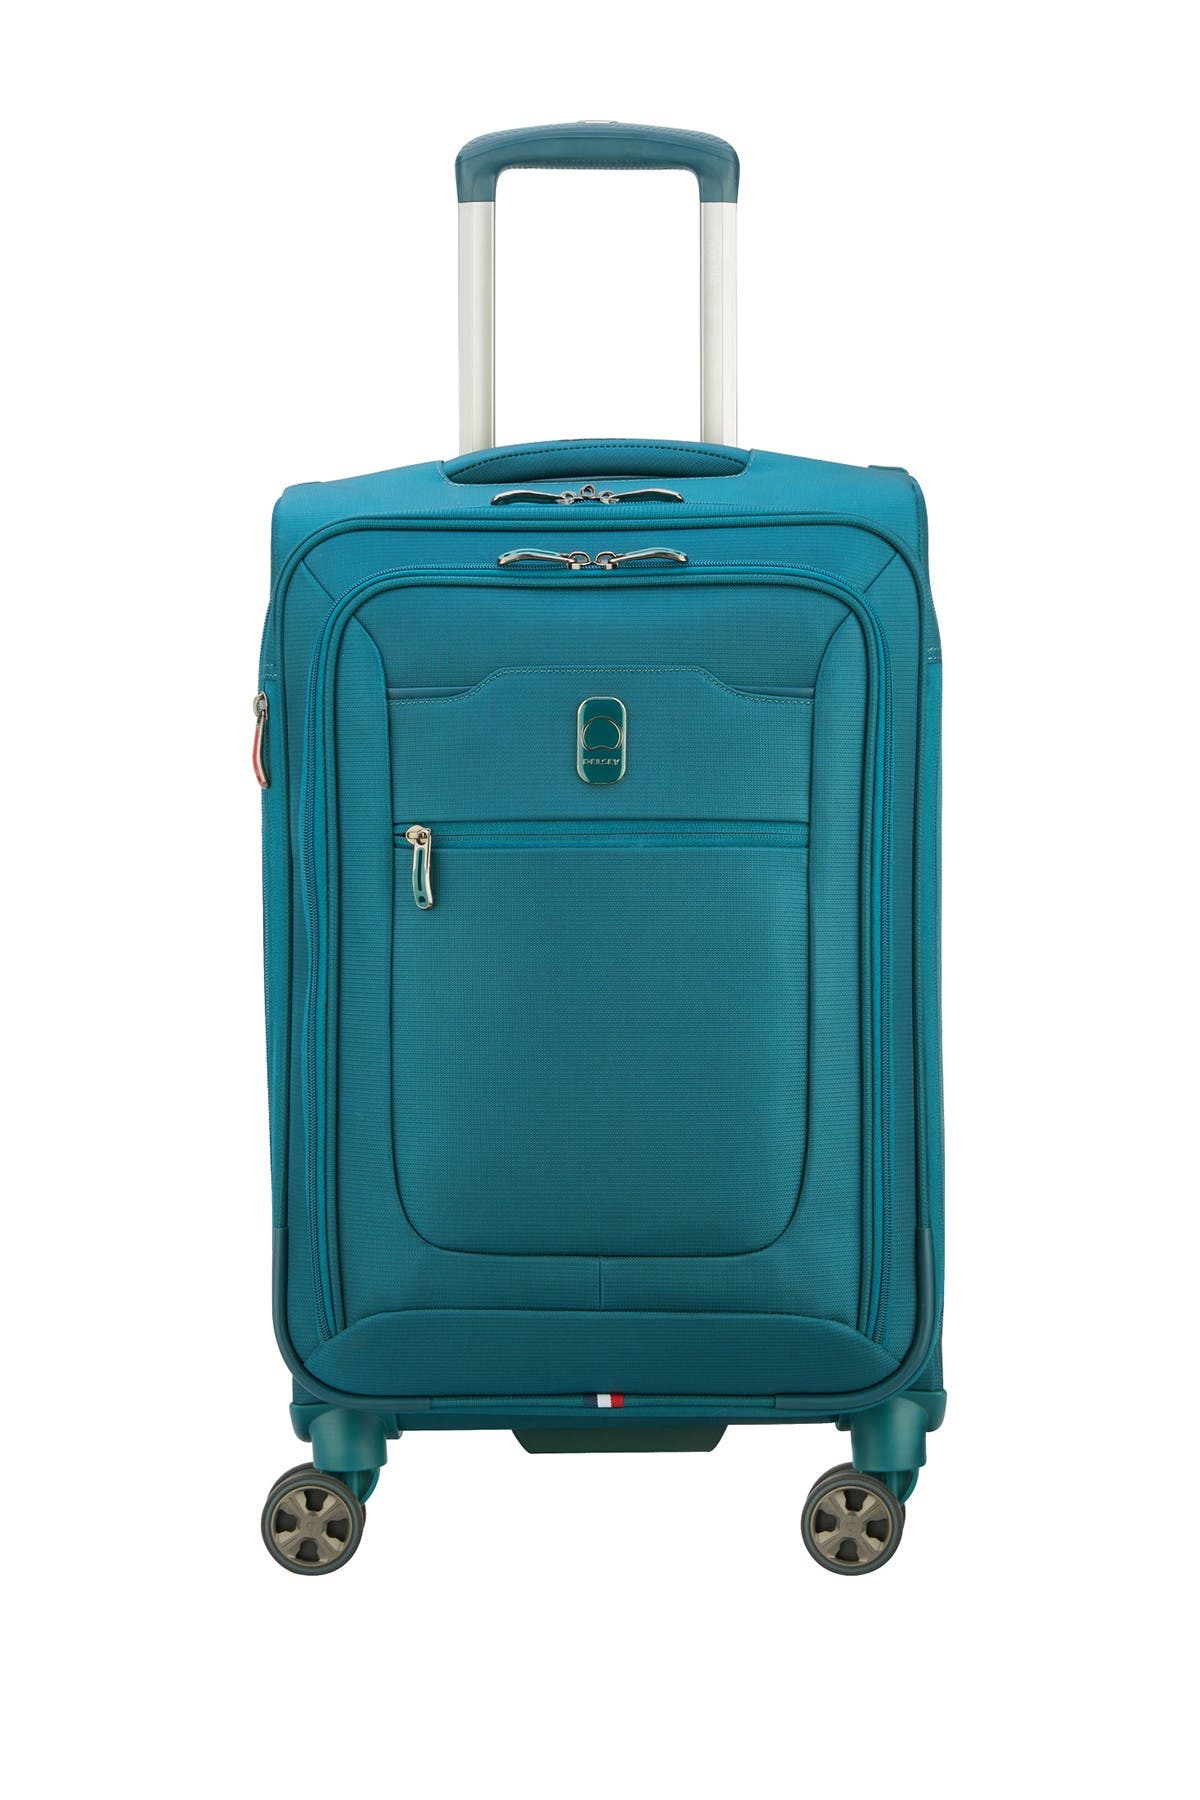 Delsey Hyperglide Expansion 22.75" Carry-on Spinner Suitcase In Teal/peacock